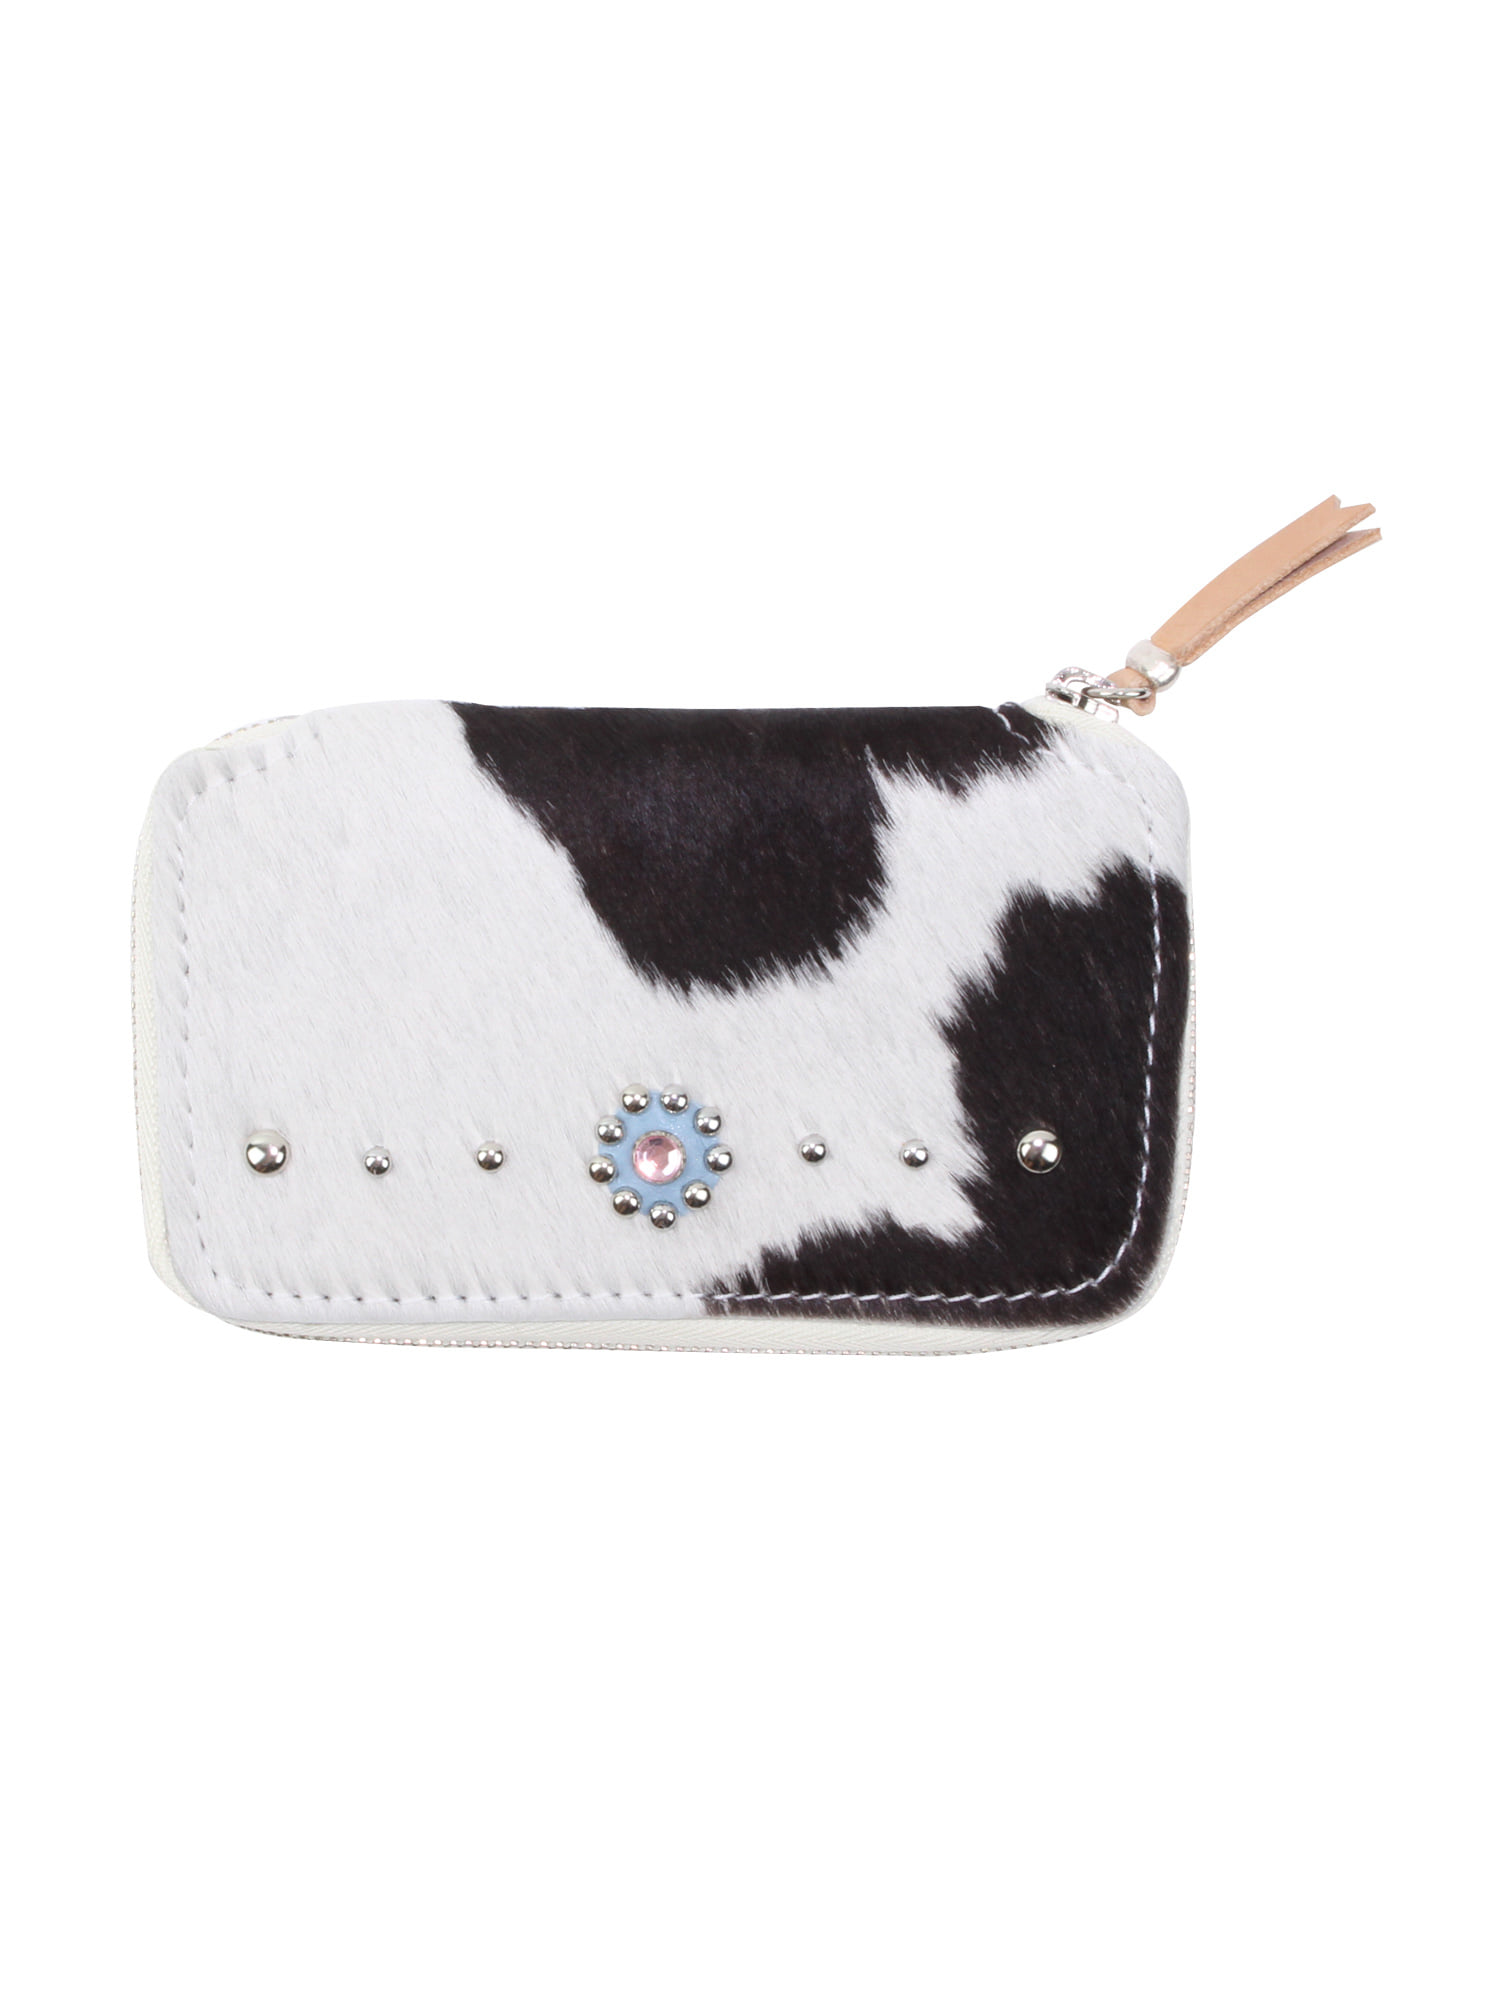 Stud Wallet - Black and White